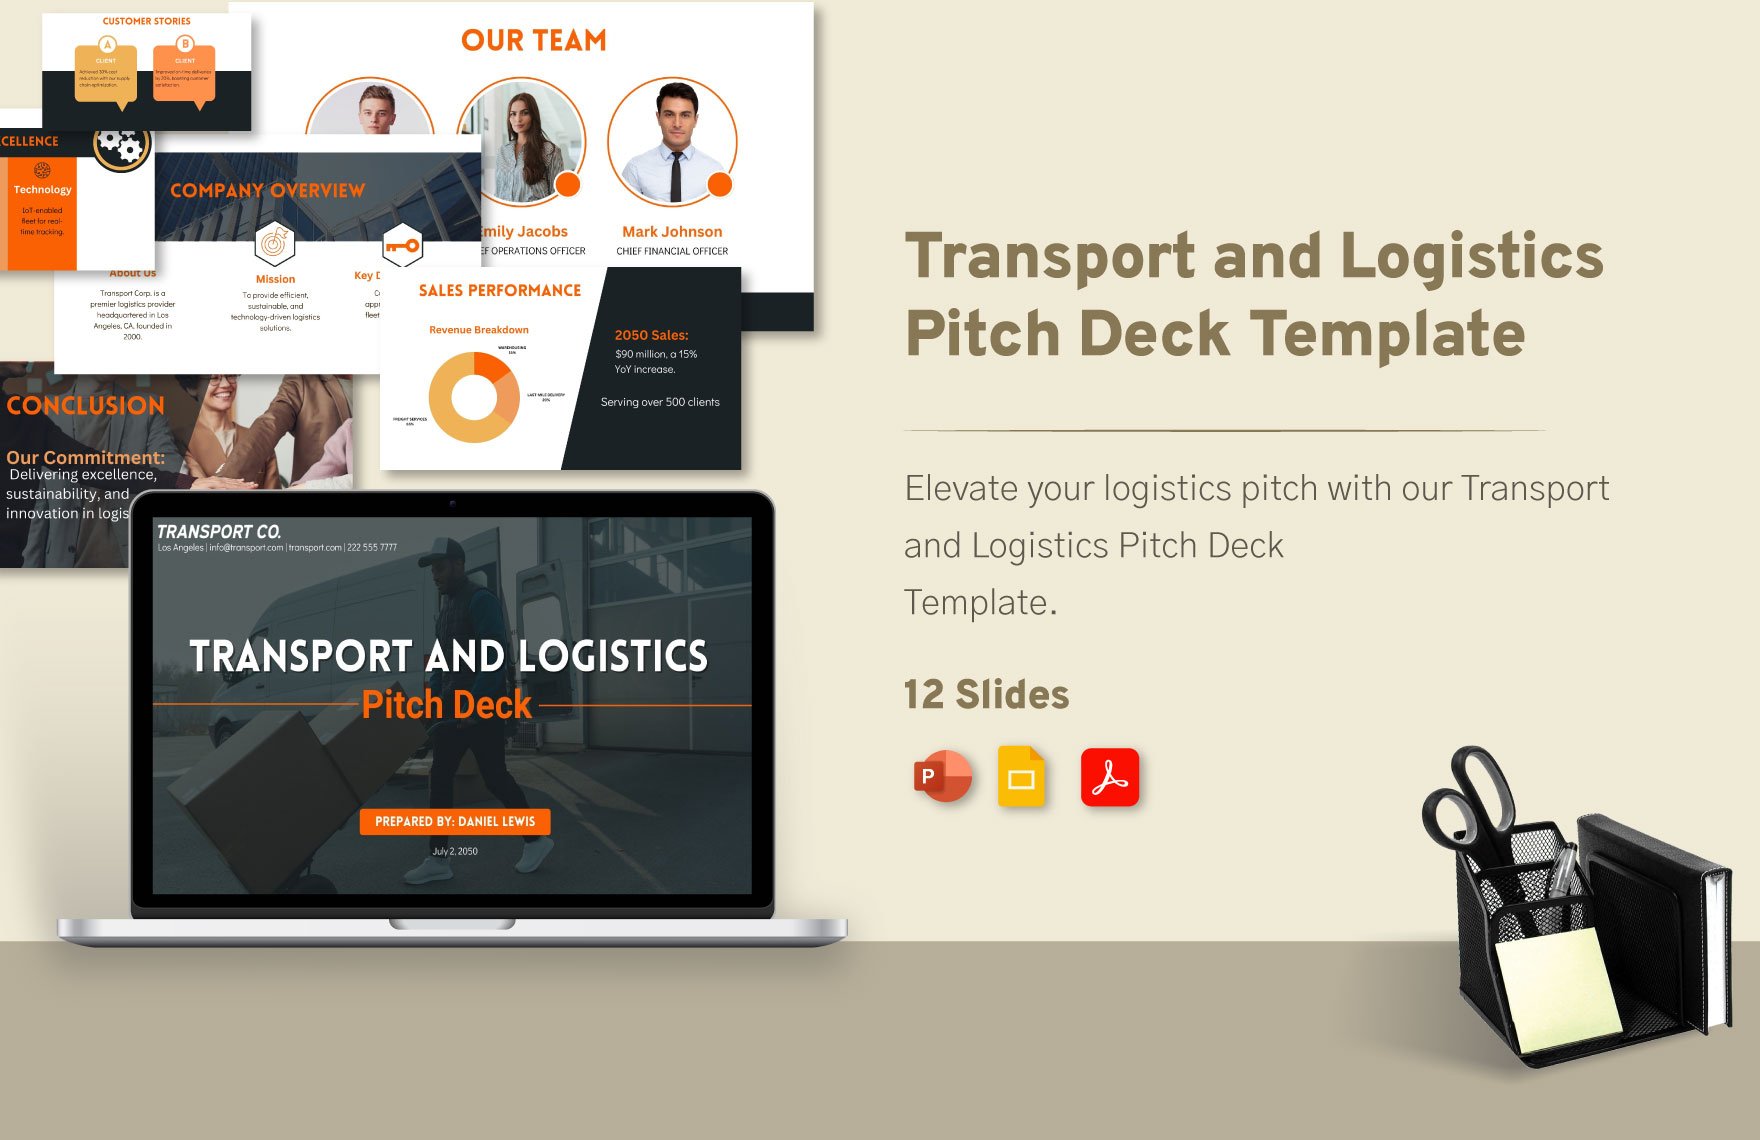 Transport and Logistics Pitch Deck Template